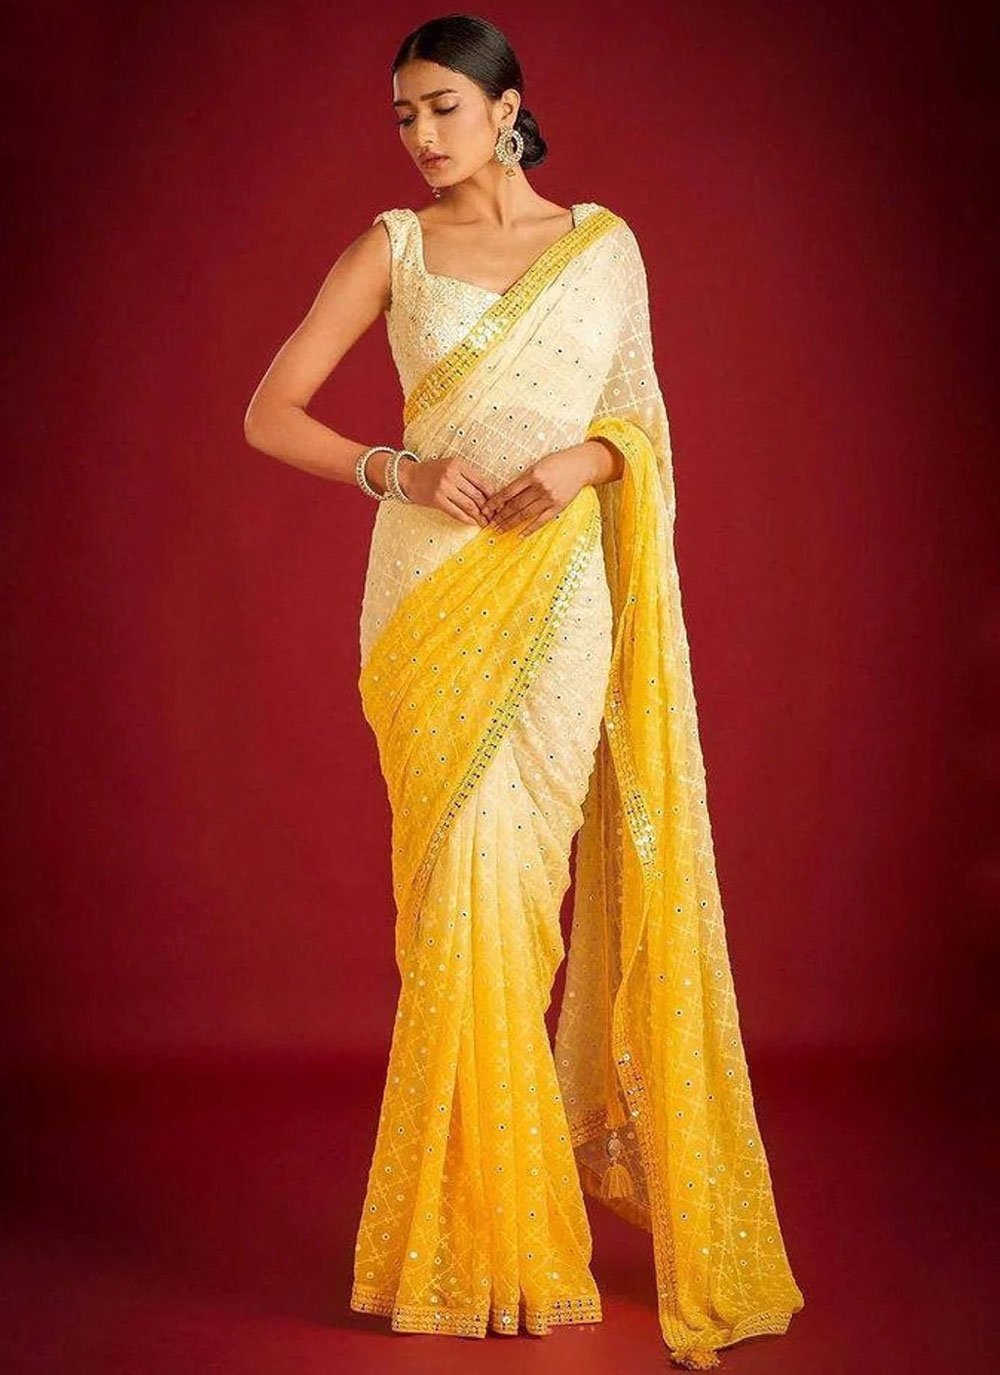 Off white and yellow stripes cotton saree with gold lace border